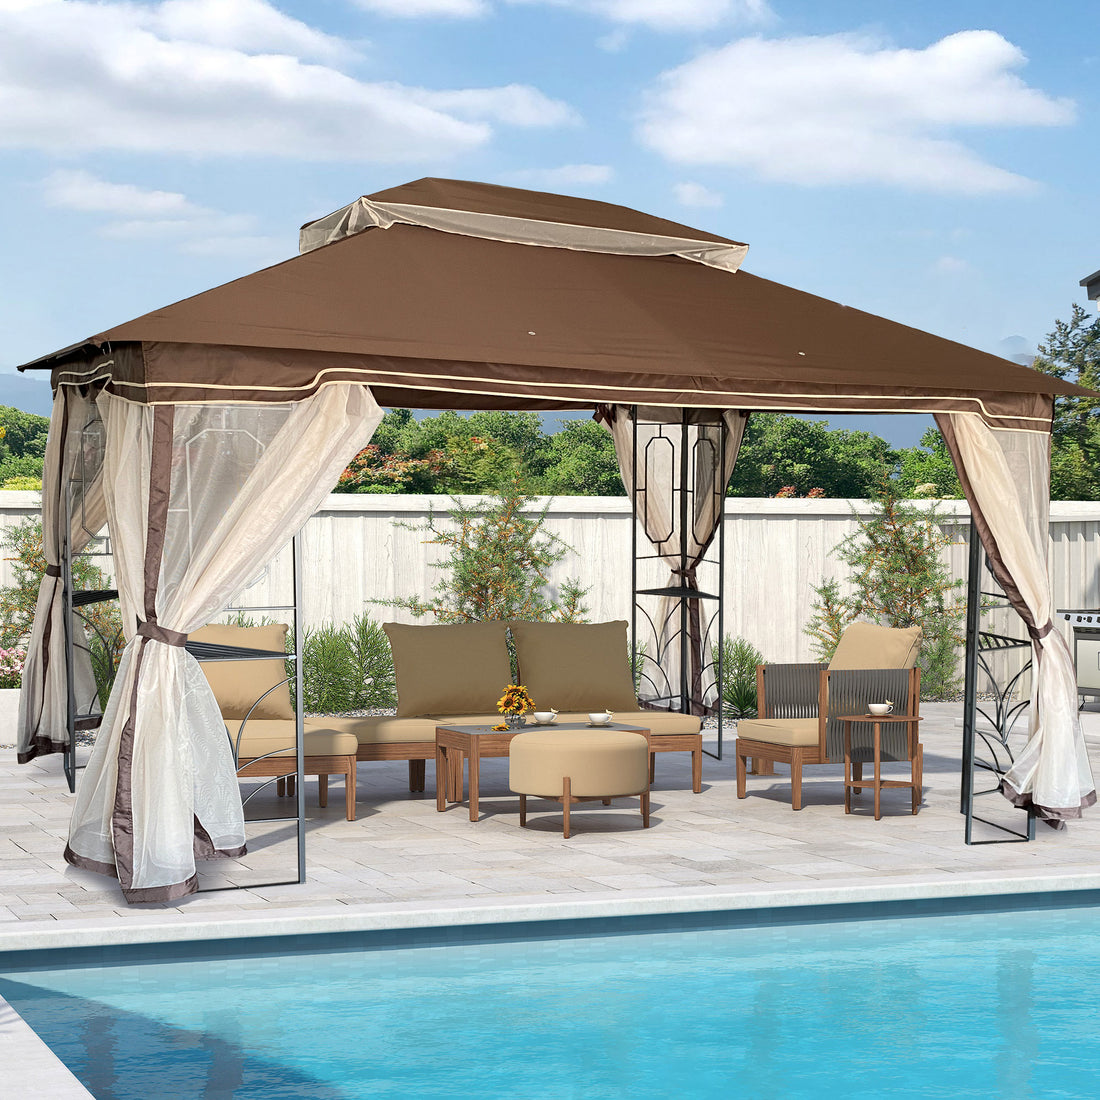 13x10 Outdoor Patio Gazebo Canopy Tent With Ventilated beige-metal